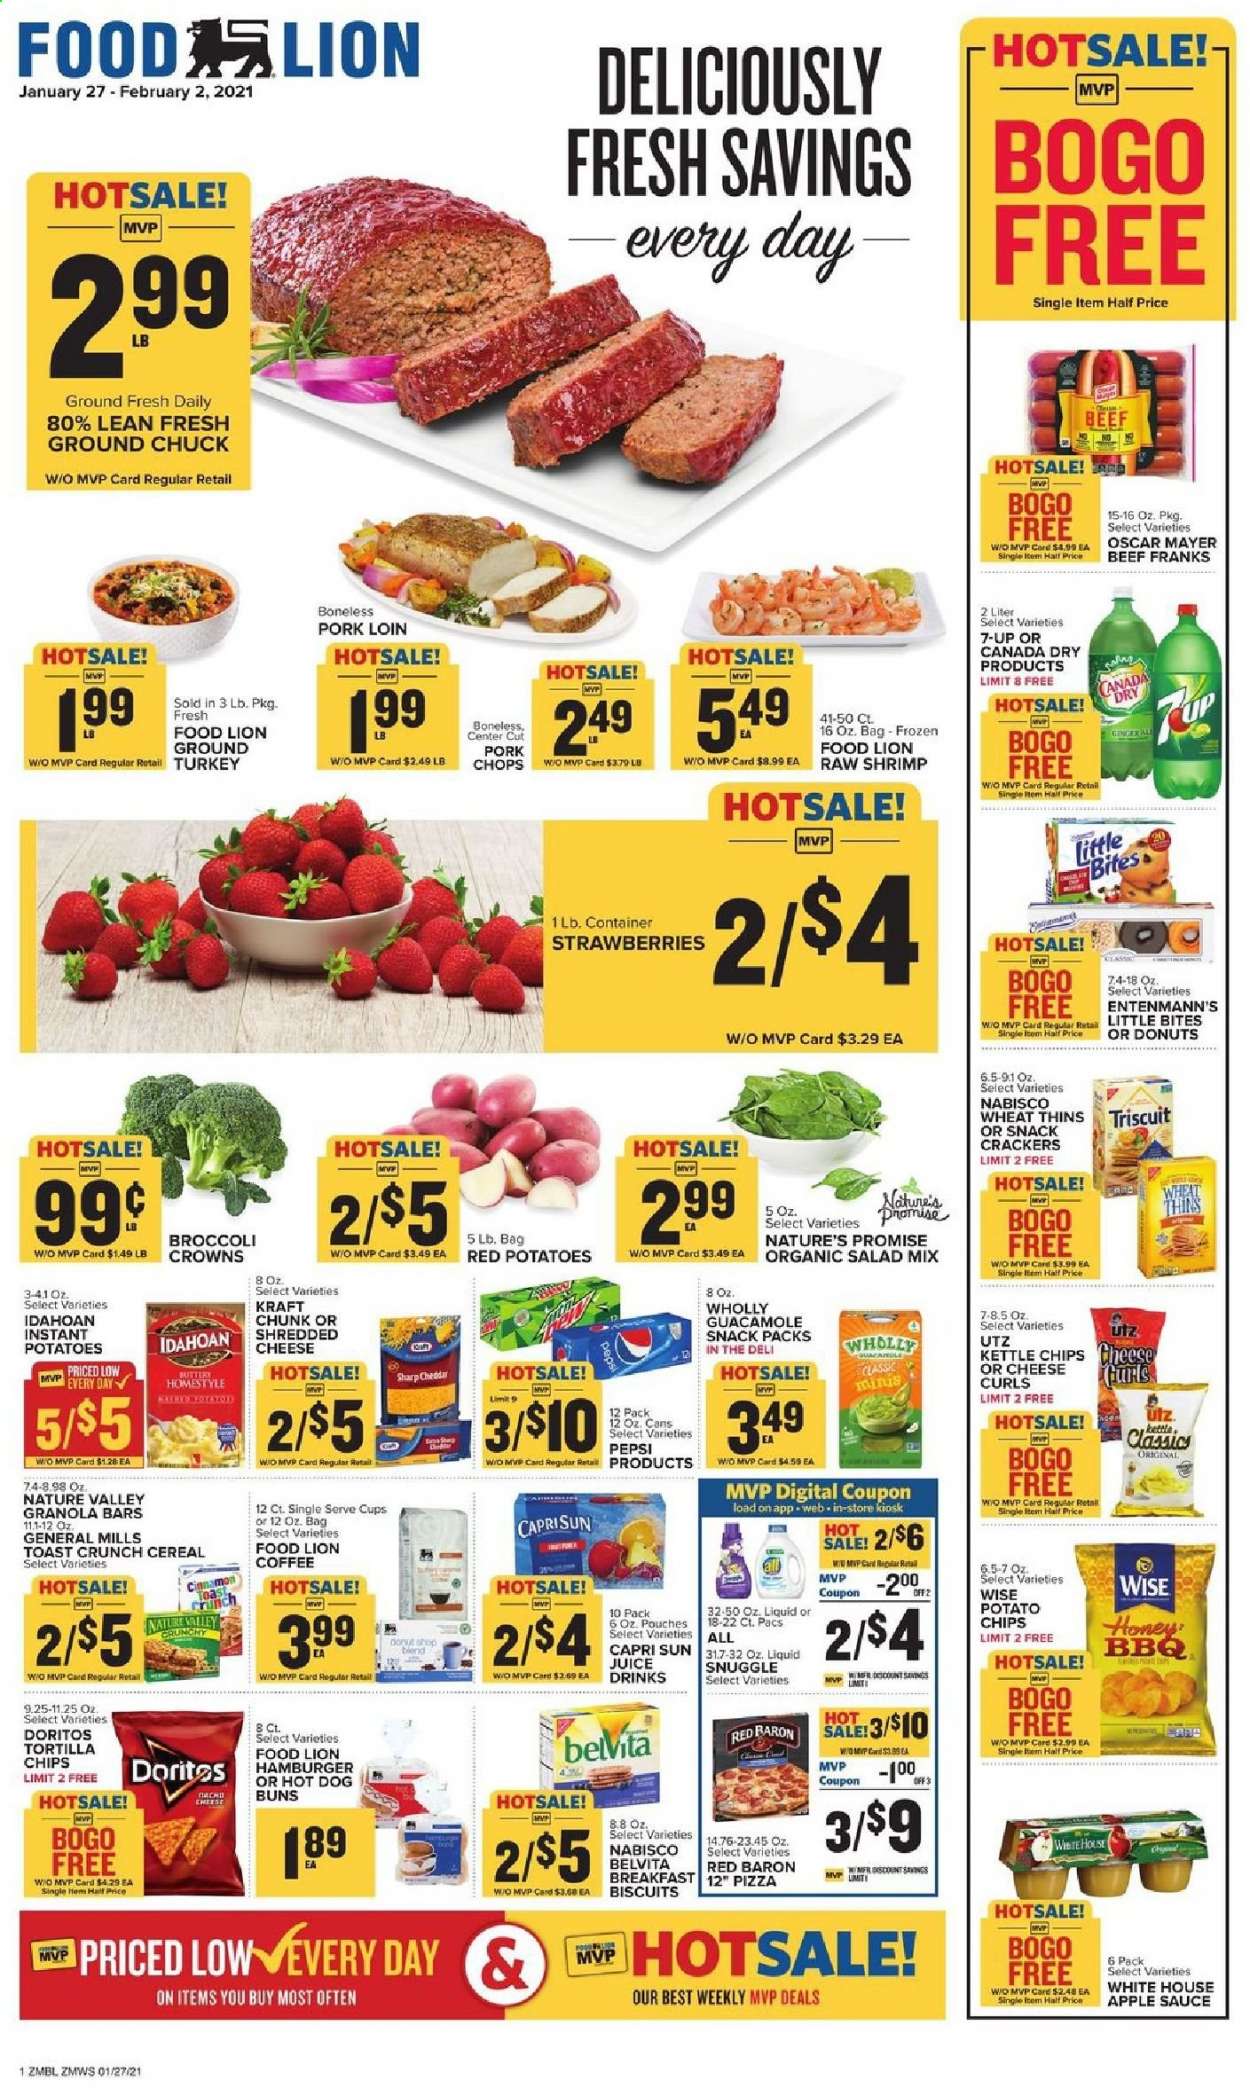 thumbnail - Food Lion Flyer - 01/27/2021 - 02/02/2021 - Sales products - toast bread, Nature’s Promise, buns, Entenmann's, Little Bites, ginger, shrimps, hot dog, pizza, hamburger, salad, sauce, Kraft®, Oscar Mayer, guacamole, shredded cheese, cheddar, strawberries, Red Baron, crackers, biscuit, Doritos, tortilla chips, snack, Thins, cereals, granola bar, belVita, Nature Valley, cinnamon, apple sauce, honey, Canada Dry, Capri Sun, Pepsi, juice, 7UP, coffee, ground chuck, pork chops, pork loin, pork meat, Snuggle, cup, Sharp. Page 1.